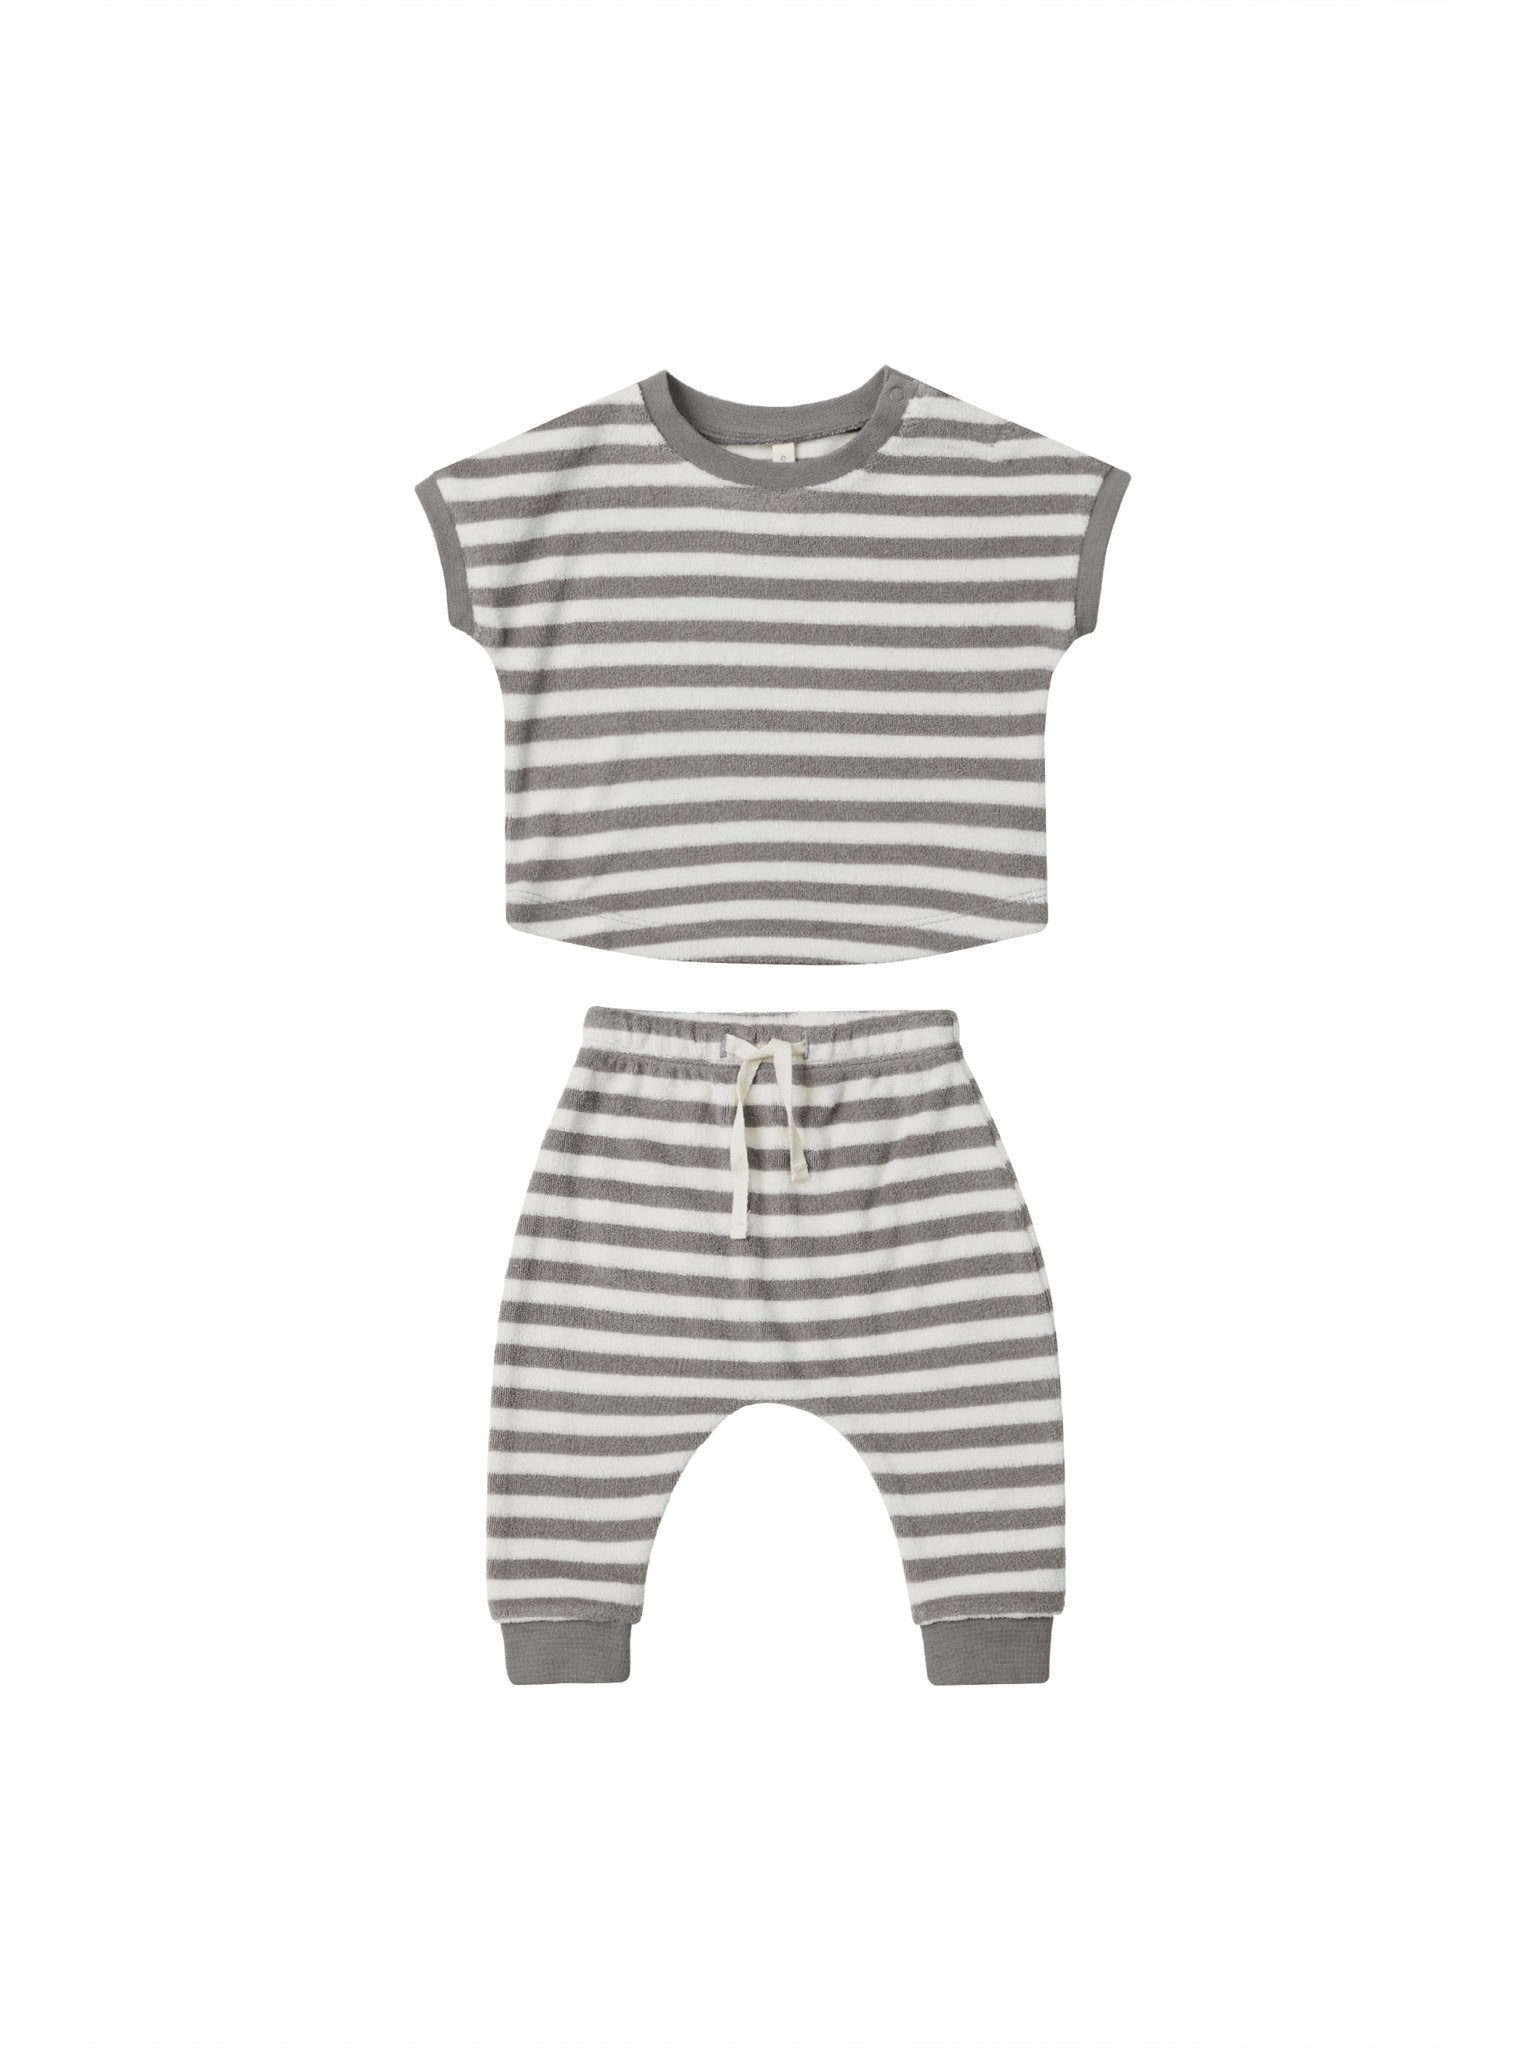 Quincy Mae Quincy Mae Terry Top & Pant Set